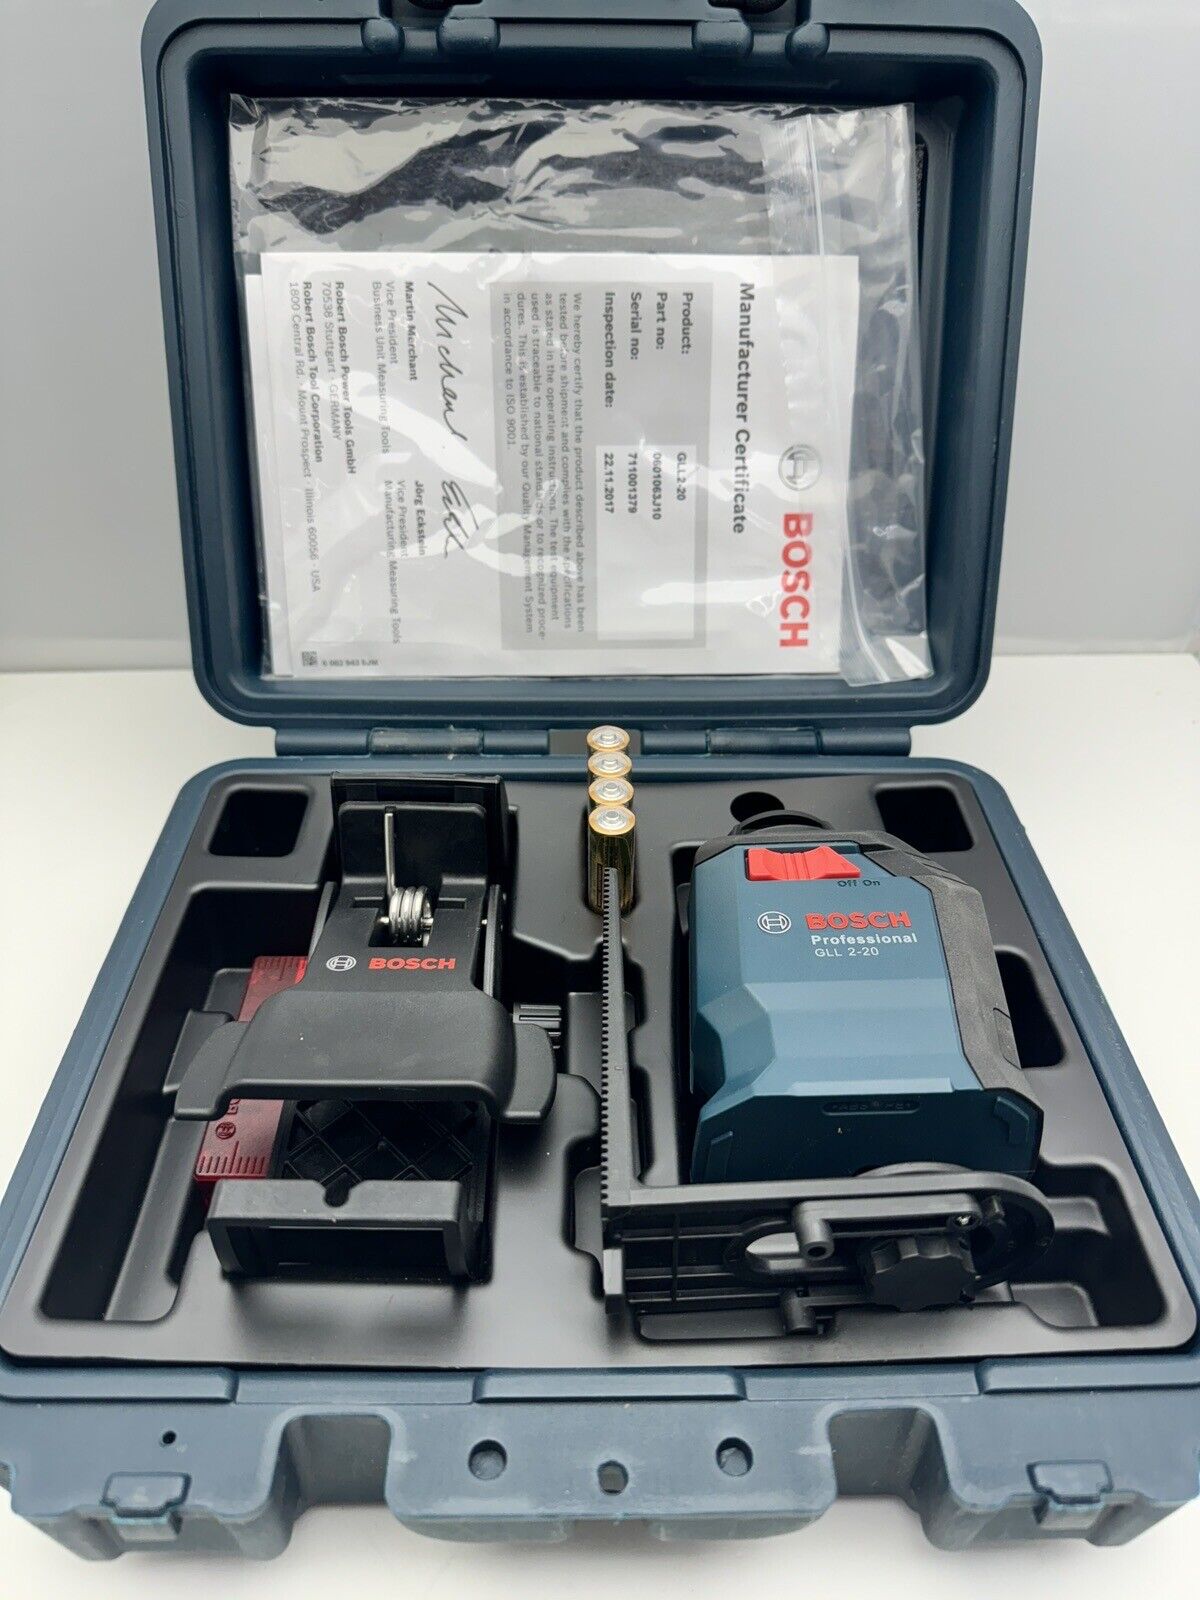 NEW Bosch GLL2-20 Self-Leveling 360 Degree Line and Cross Laser